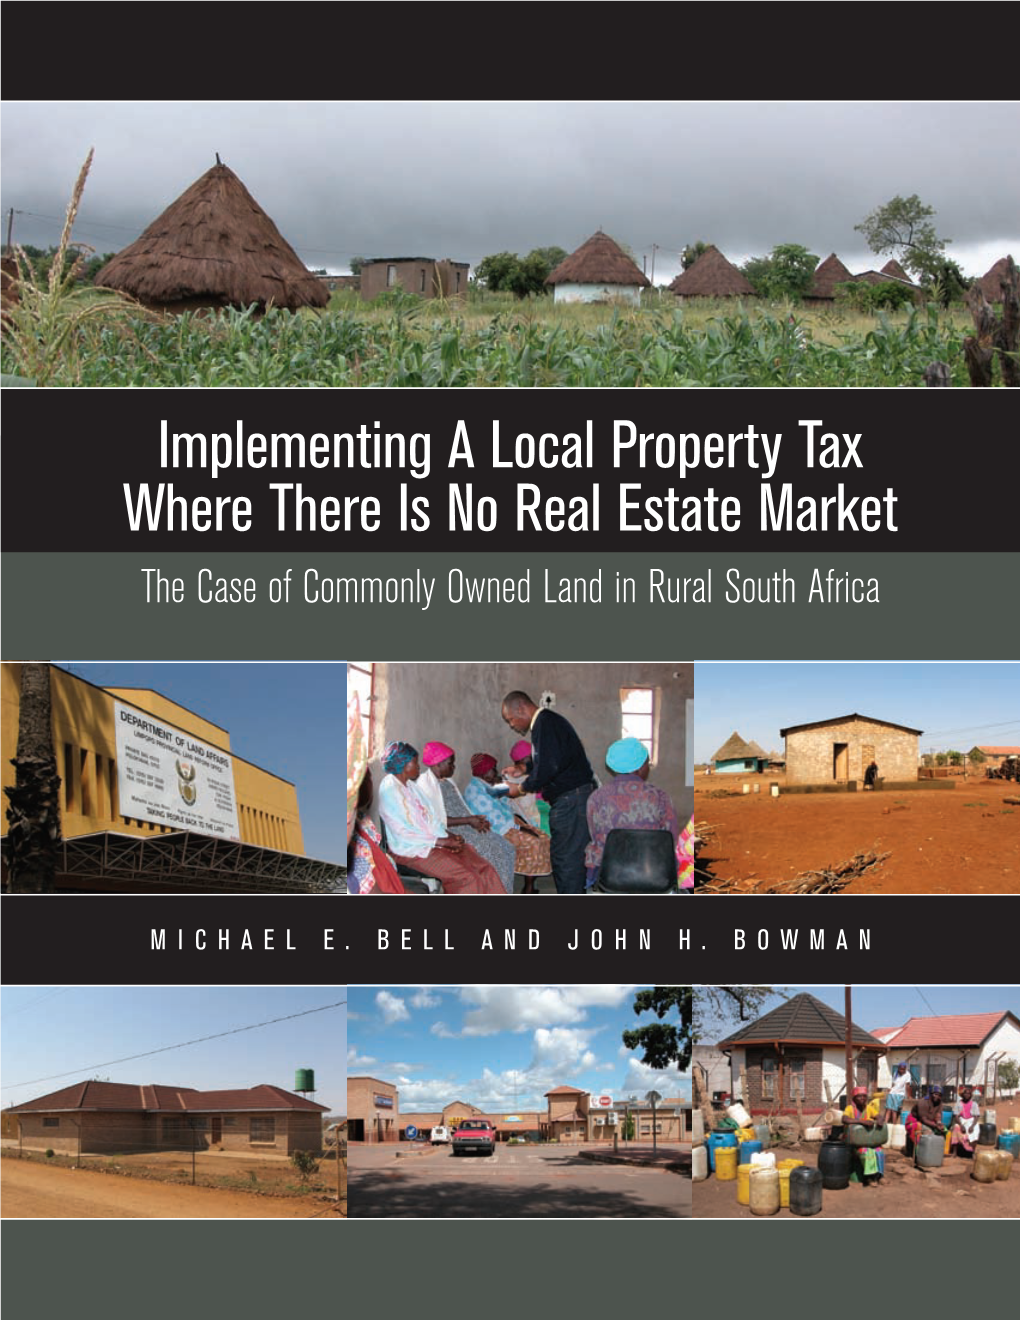 Implementing a Local Property Tax Where There Is No Real Estate Market the Case of Commonly Owned Land in Rural South Africa